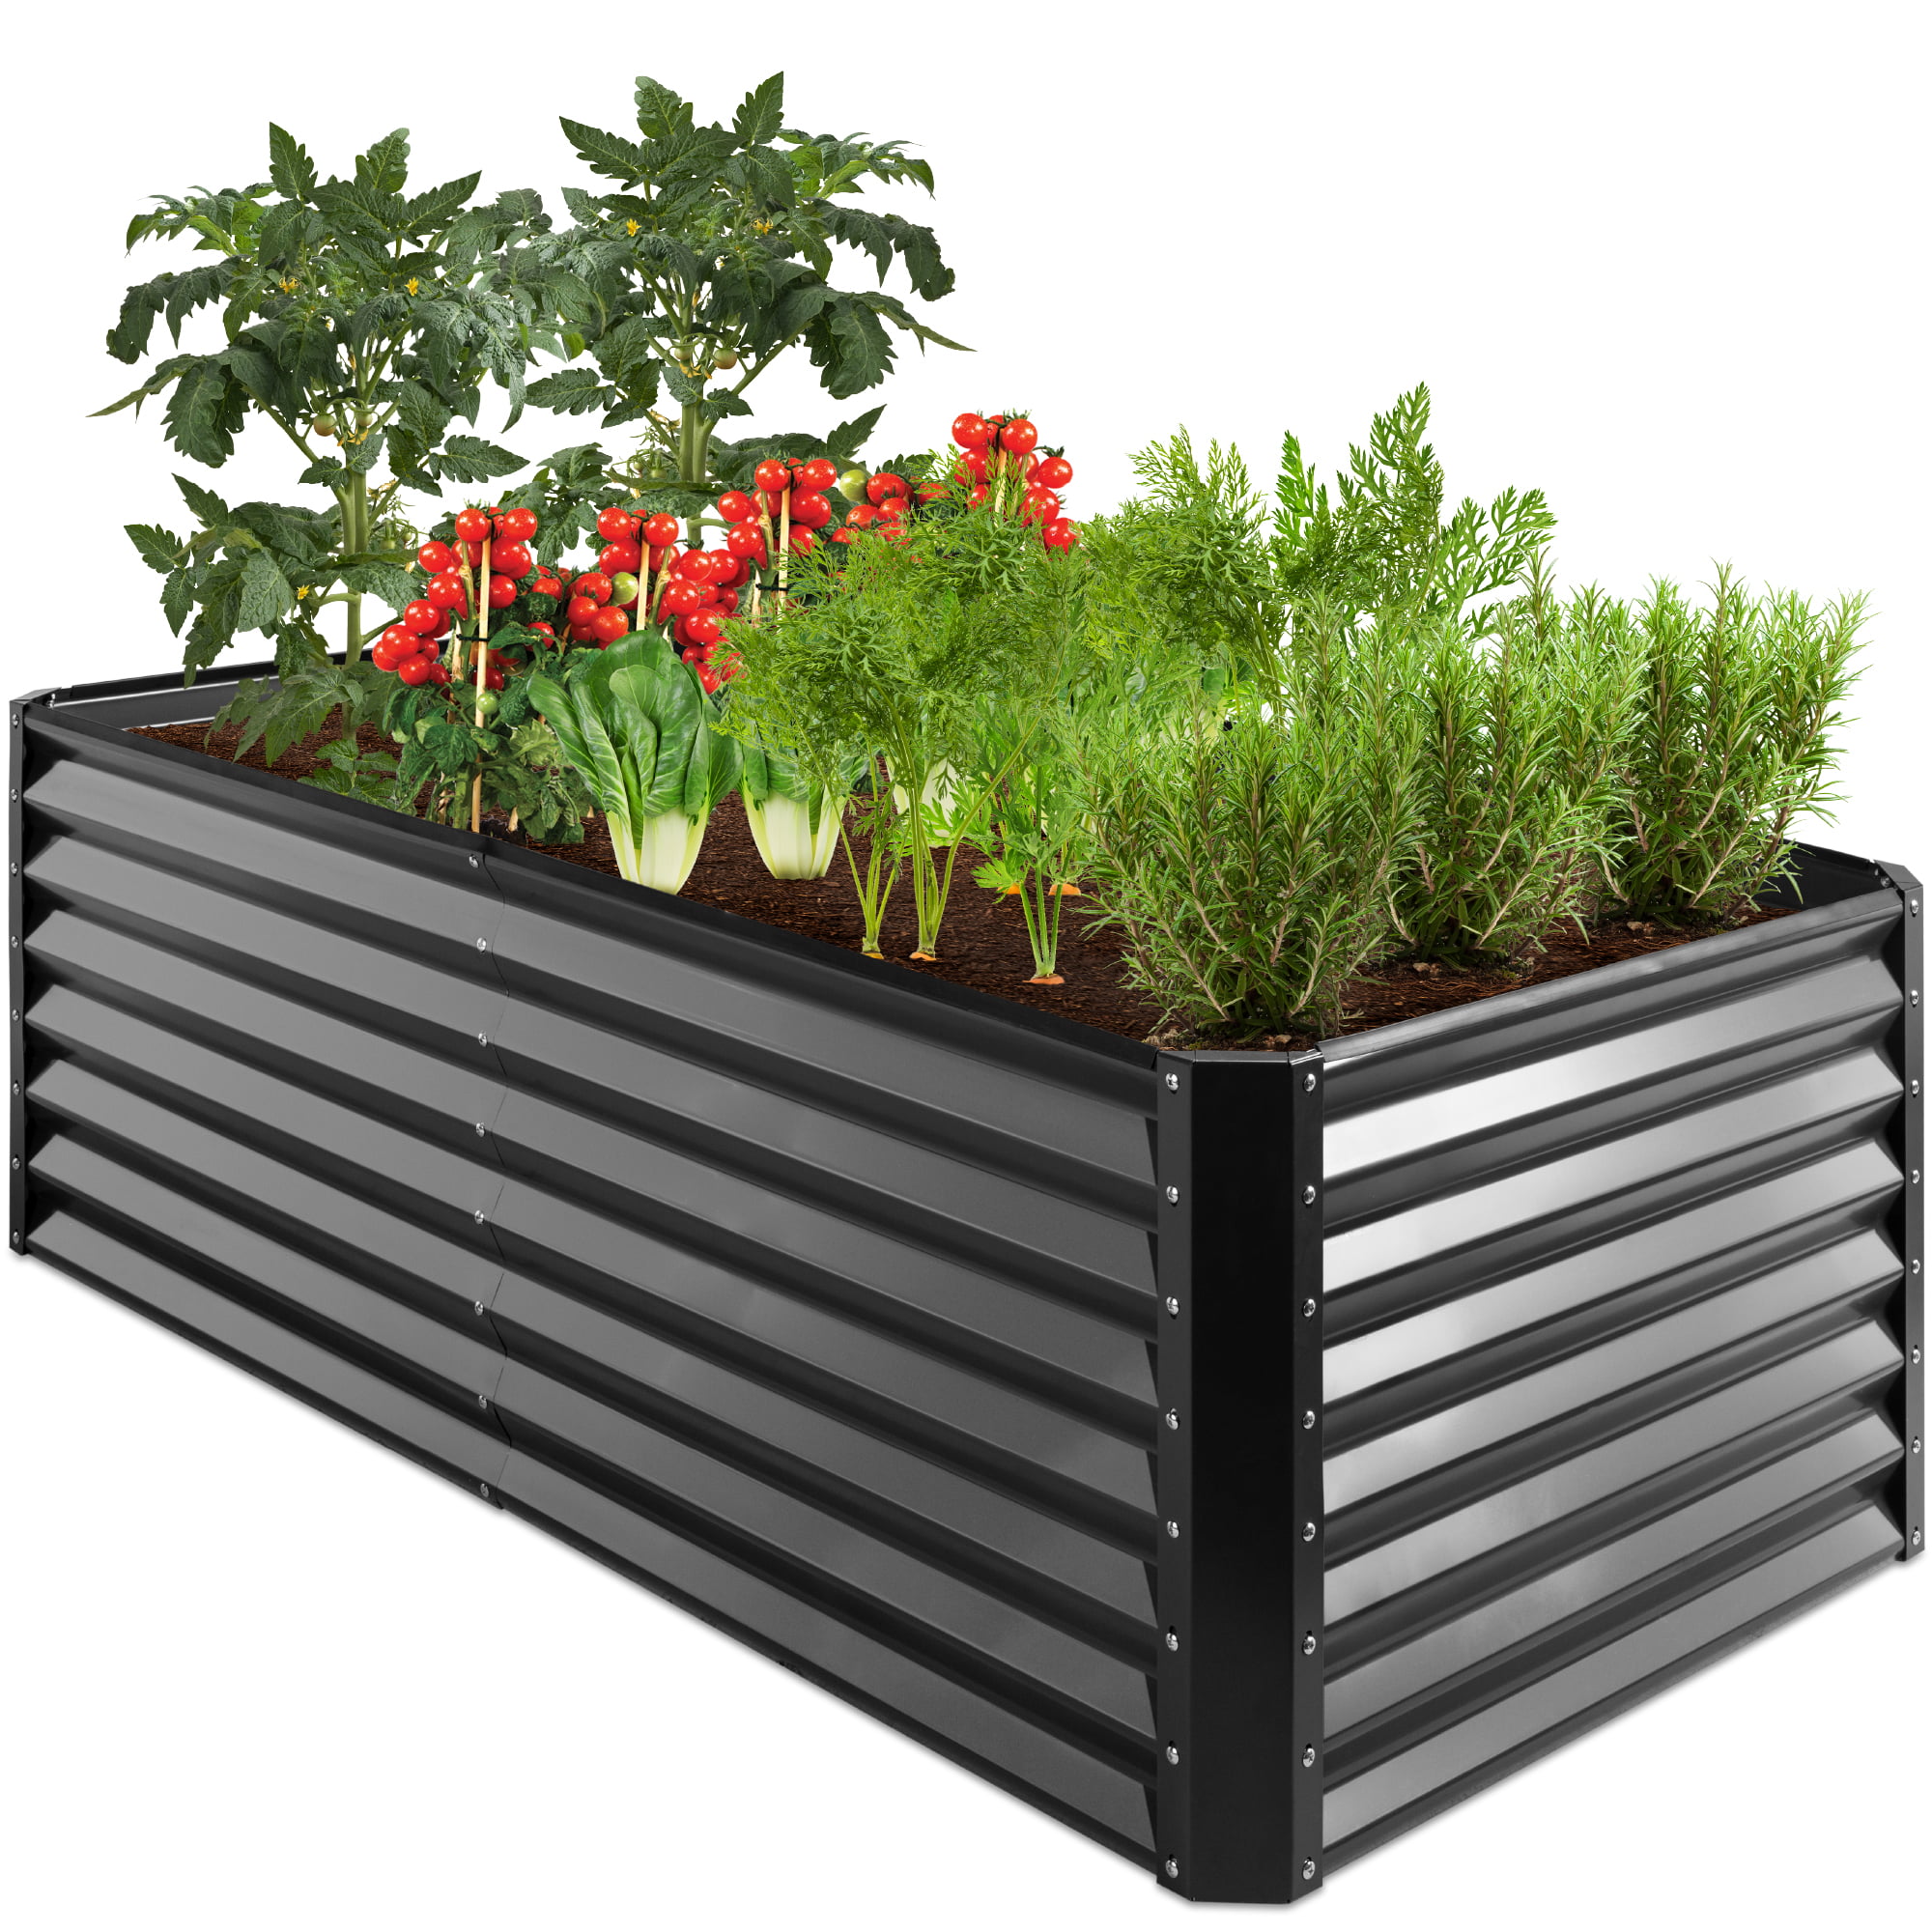 Vegetables Flowers Herbs, How To Build Corrugated Metal Garden Beds